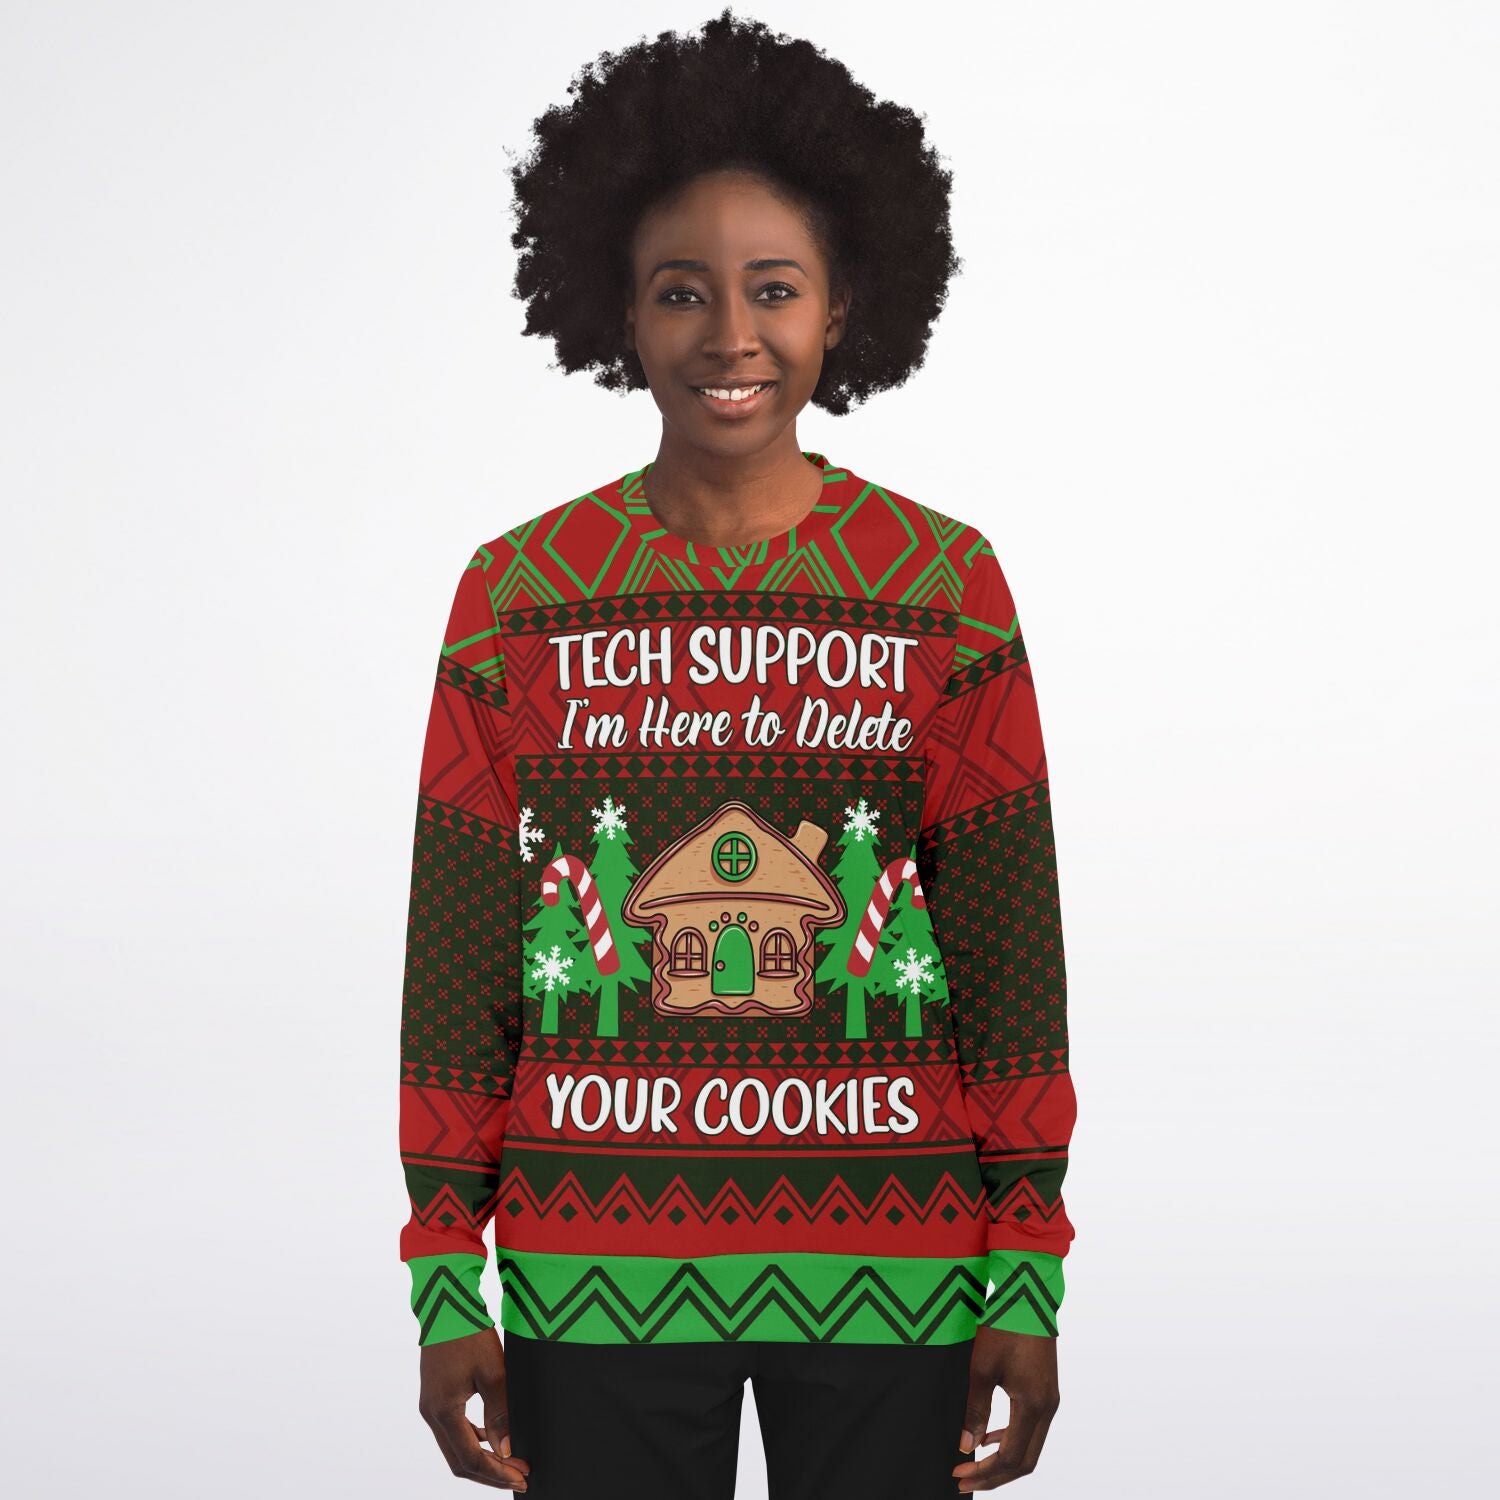 Im Here To Delete Your Cookies Sweatshirt | Unisex Ugly Christmas Sweater, Xmas Sweater, Holiday Sweater, Festive Sweater, Funny Sweater,